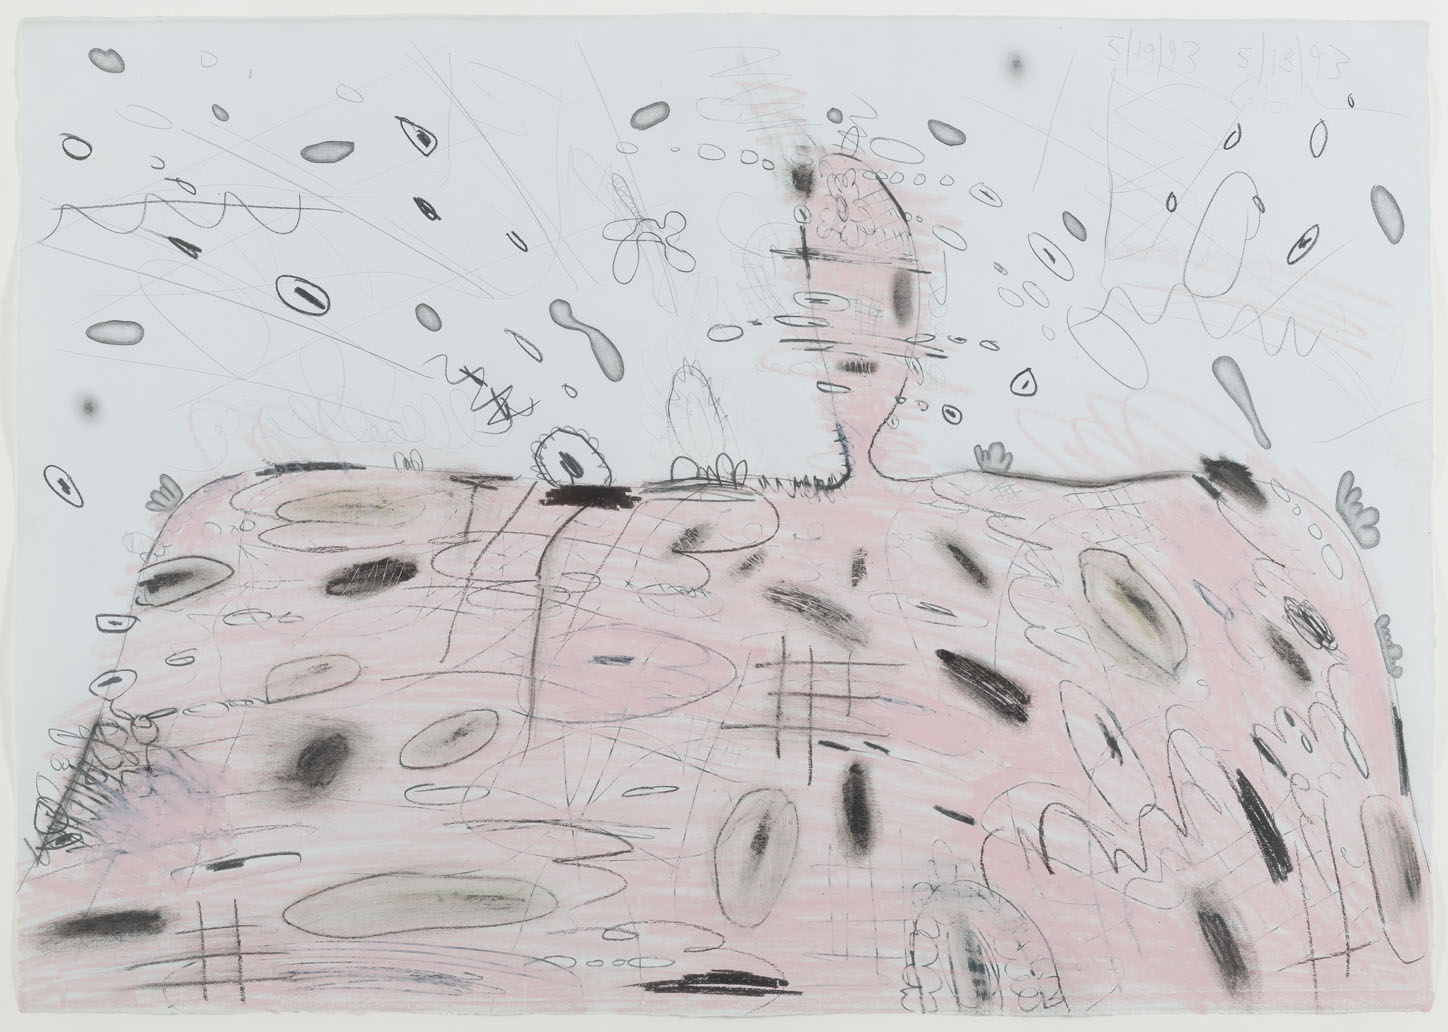 <i>Pink Mound with Eruption (5/18/93, 5/19/93)</i>, 1993, wax crayon and graphite on paper,19 5/8 x 28 inches (49.8 x 71.1 cm)